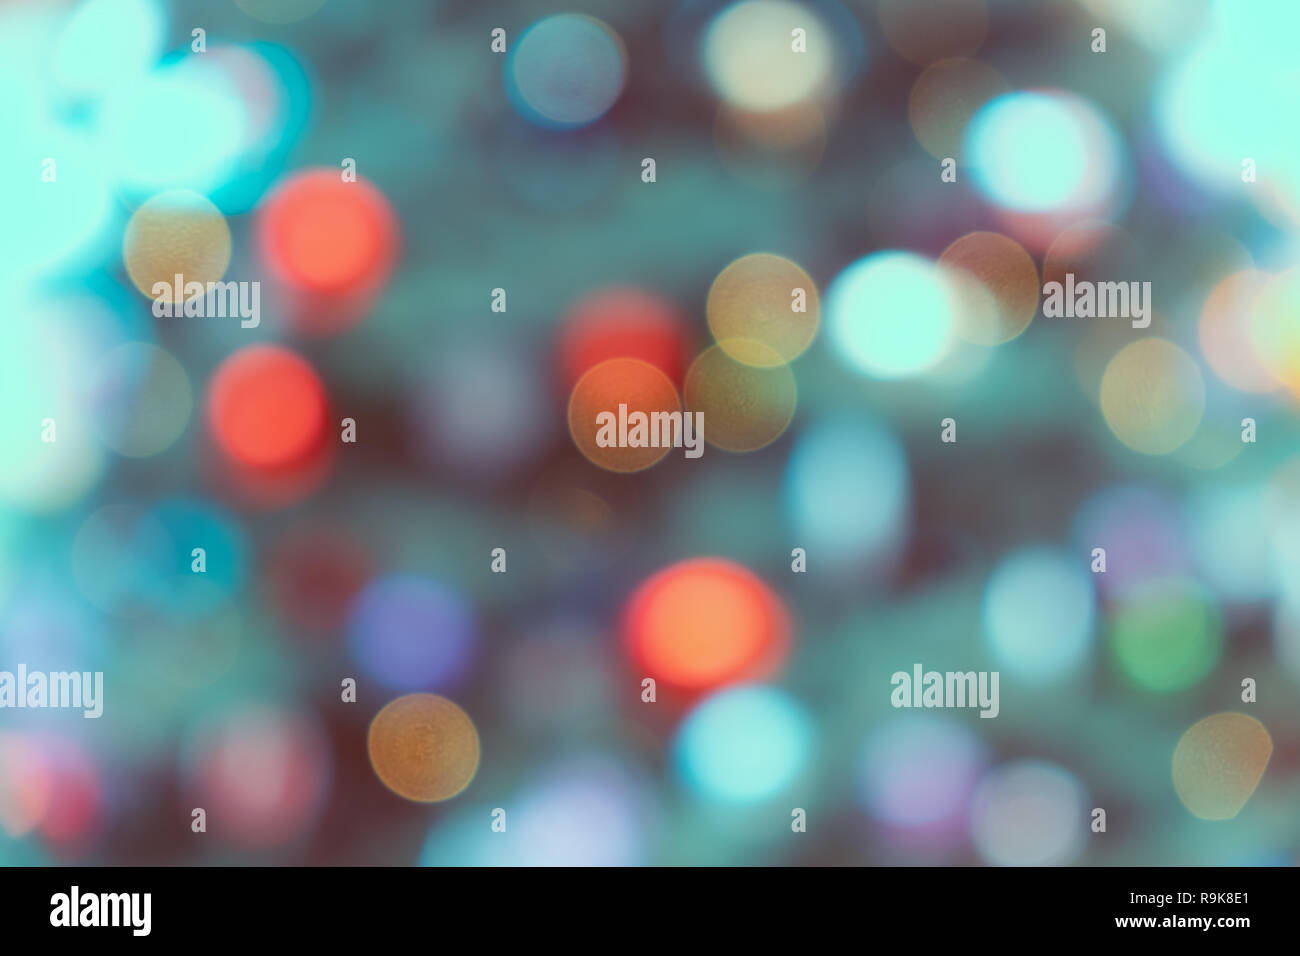 colored abstract blurred light background layout design can be use for  background concept or festival background Stock Photo - Alamy